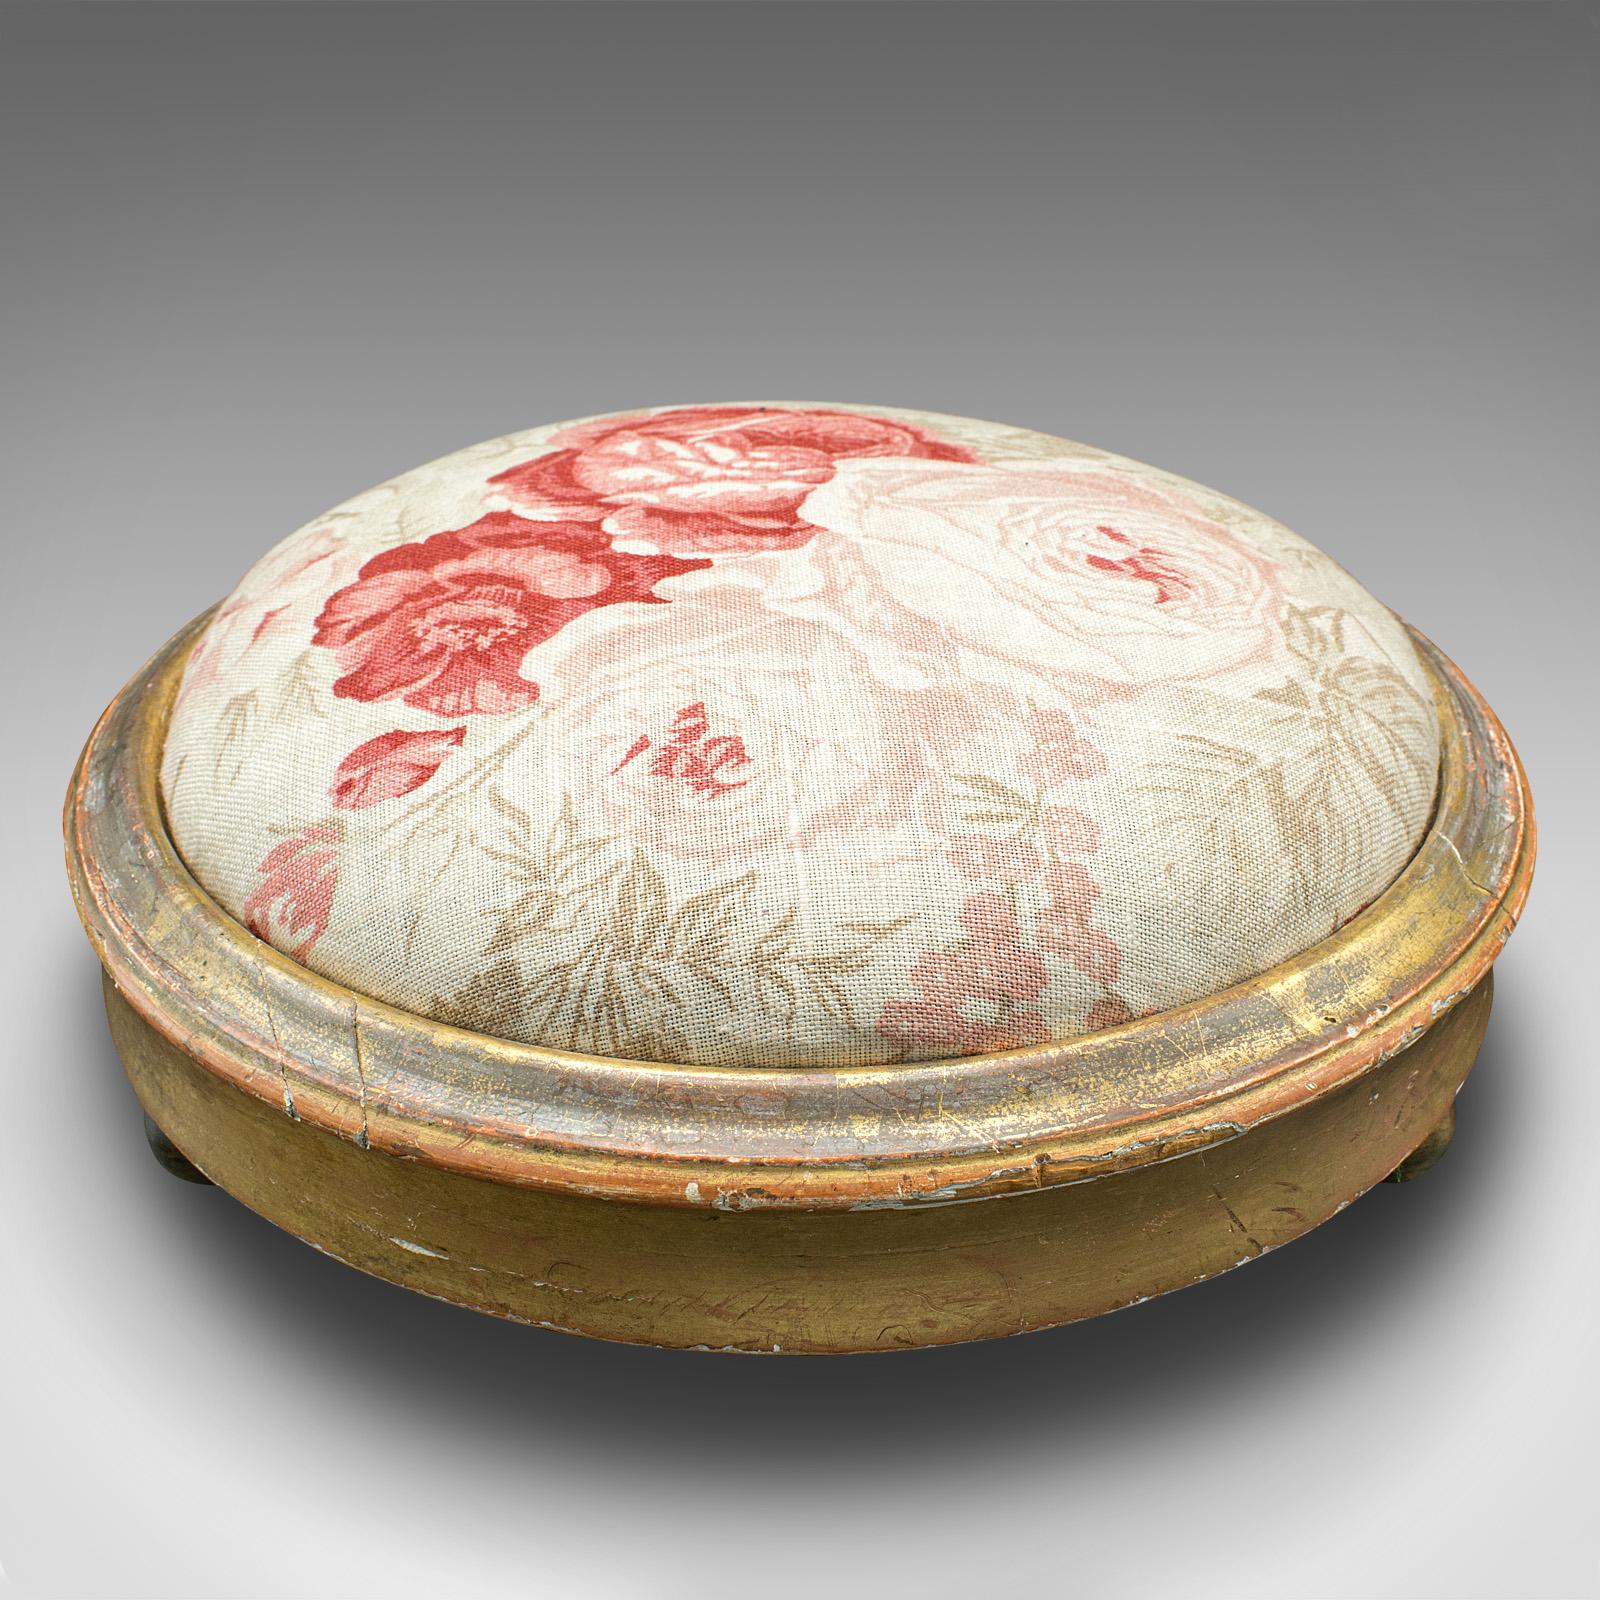 This is an antique padded footstool. An English, giltwood lounge stool, dating to the Regency period, circa 1820.

Delightful foliate interest and appealing colour throughout
Displays a desirable aged patina and in good order
Striking giltwood